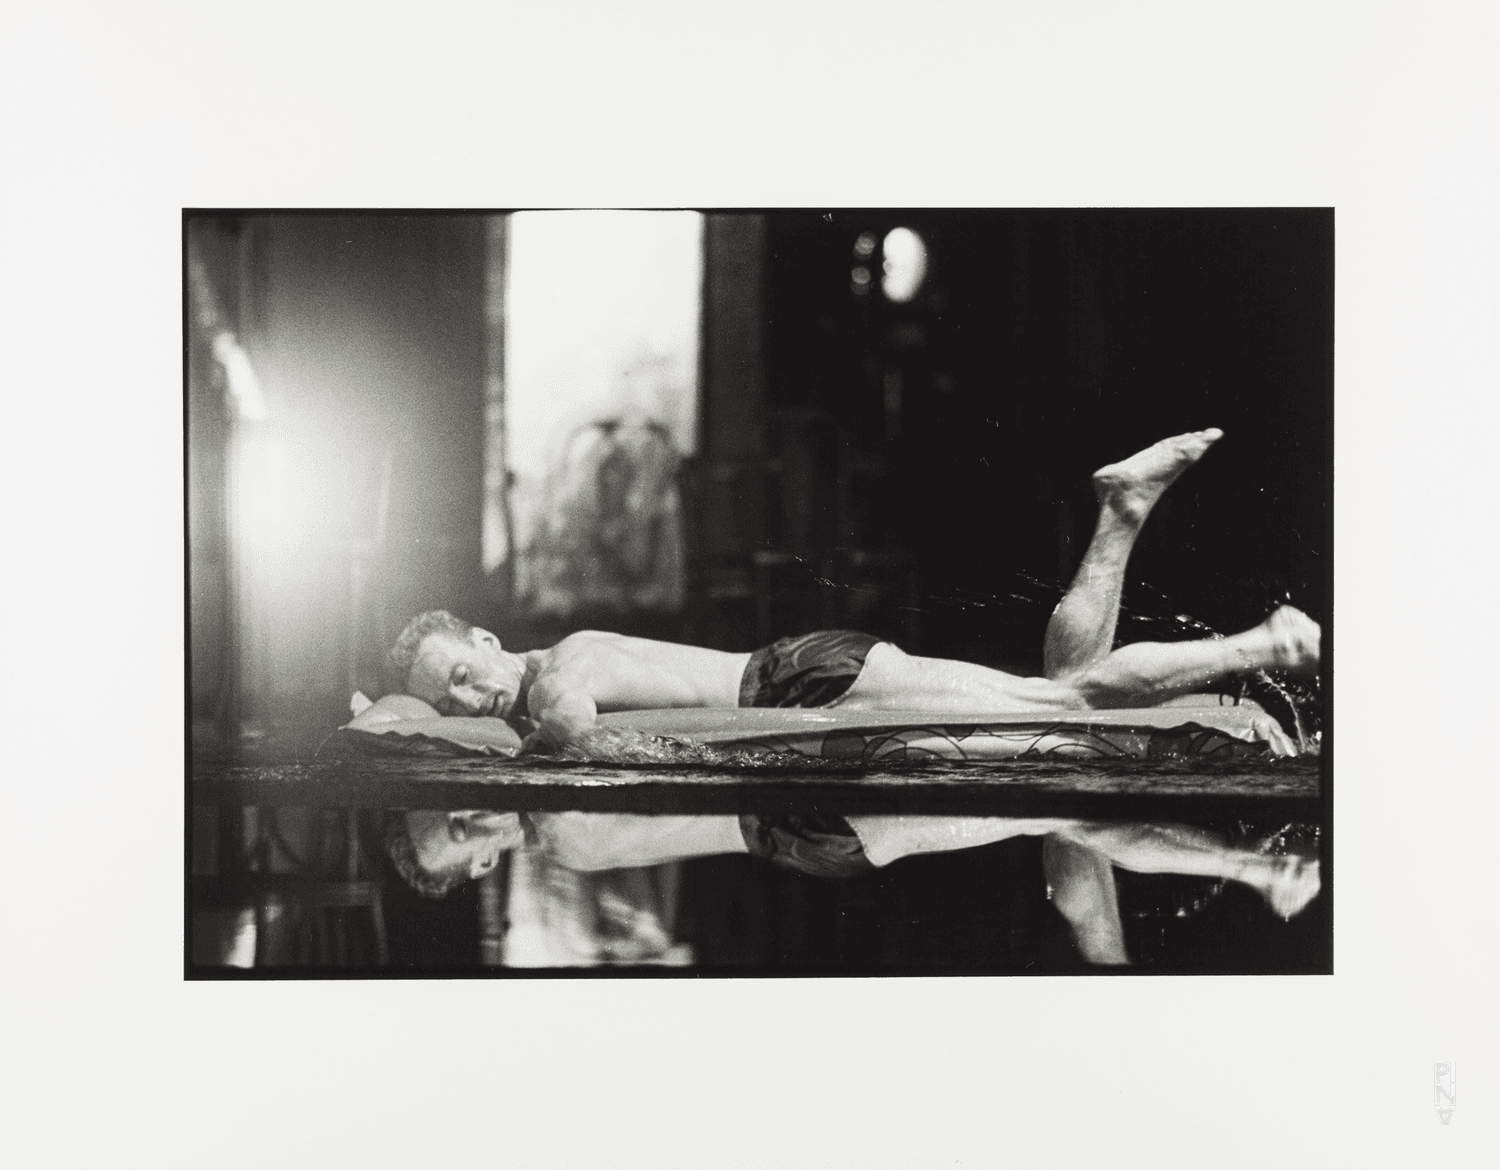 Dominique Mercy in “Arien” by Pina Bausch